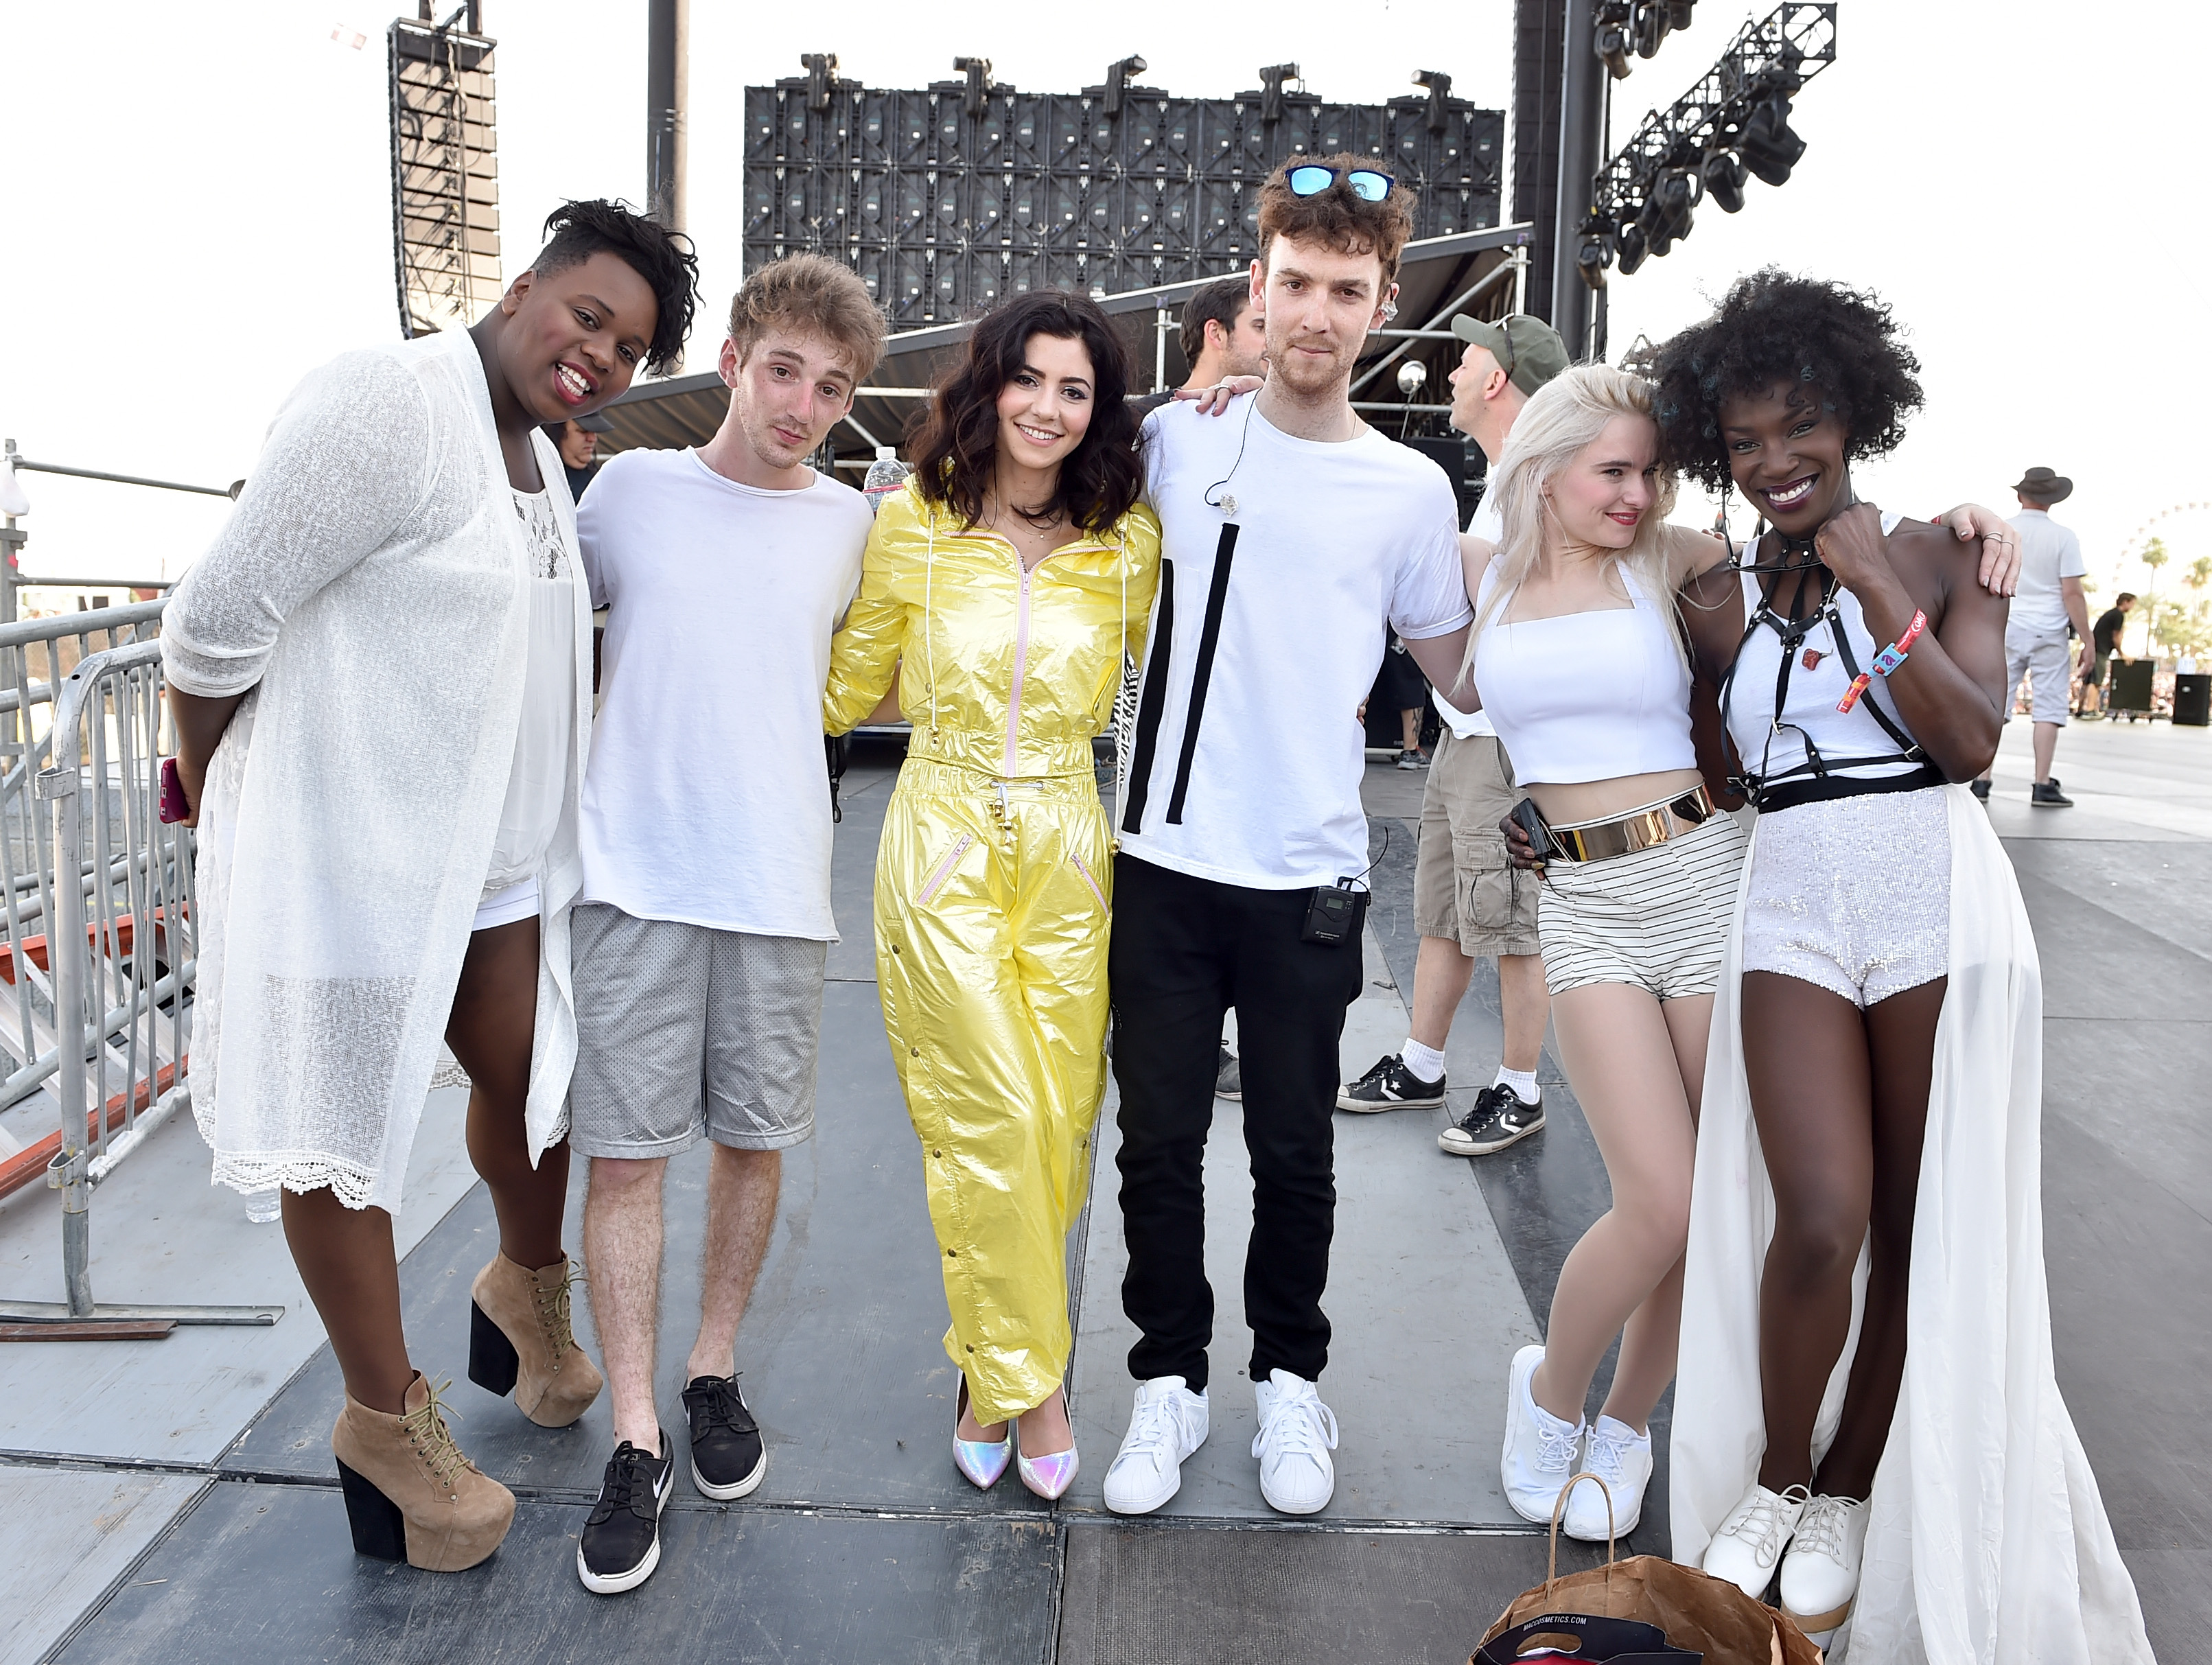 Clean Bandit and Marina and the Diamonds